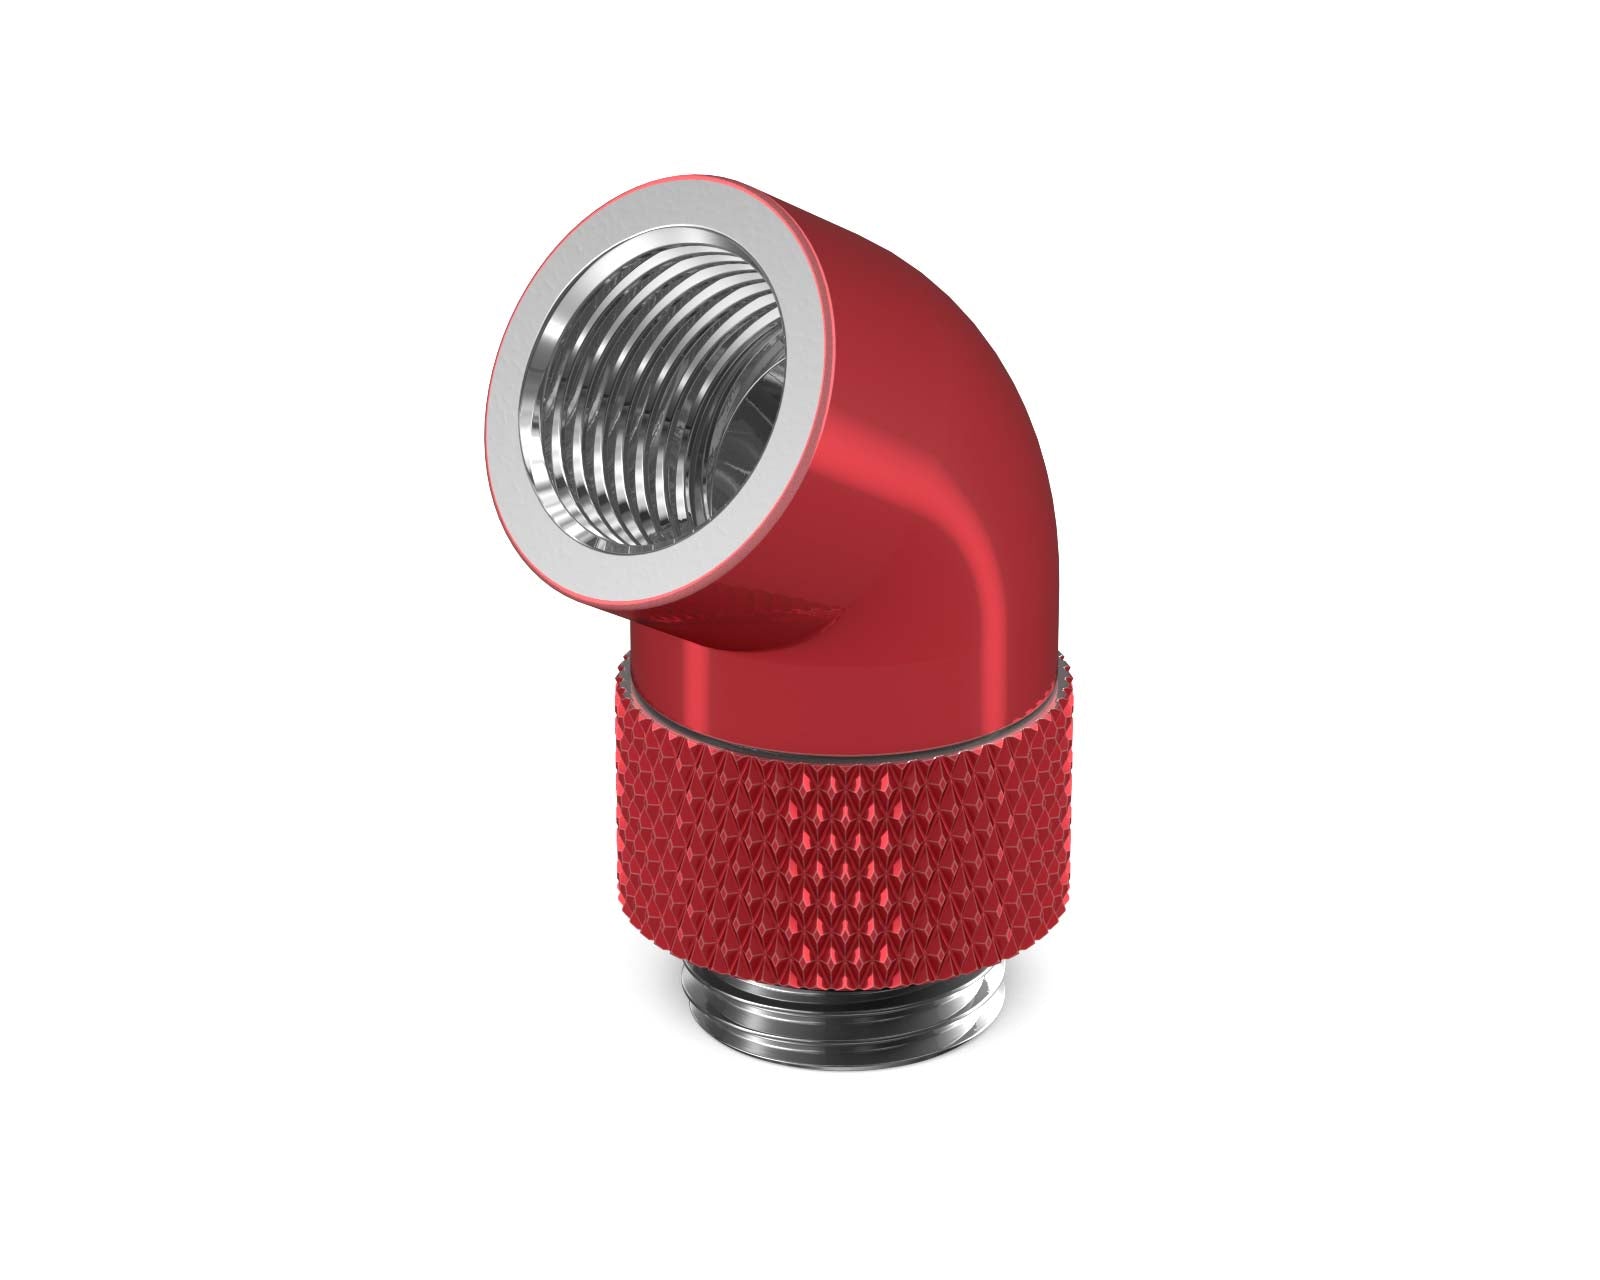 PrimoChill Male to Female G 1/4in. 60 Degree SX Rotary Elbow Fitting - PrimoChill - KEEPING IT COOL Candy Red